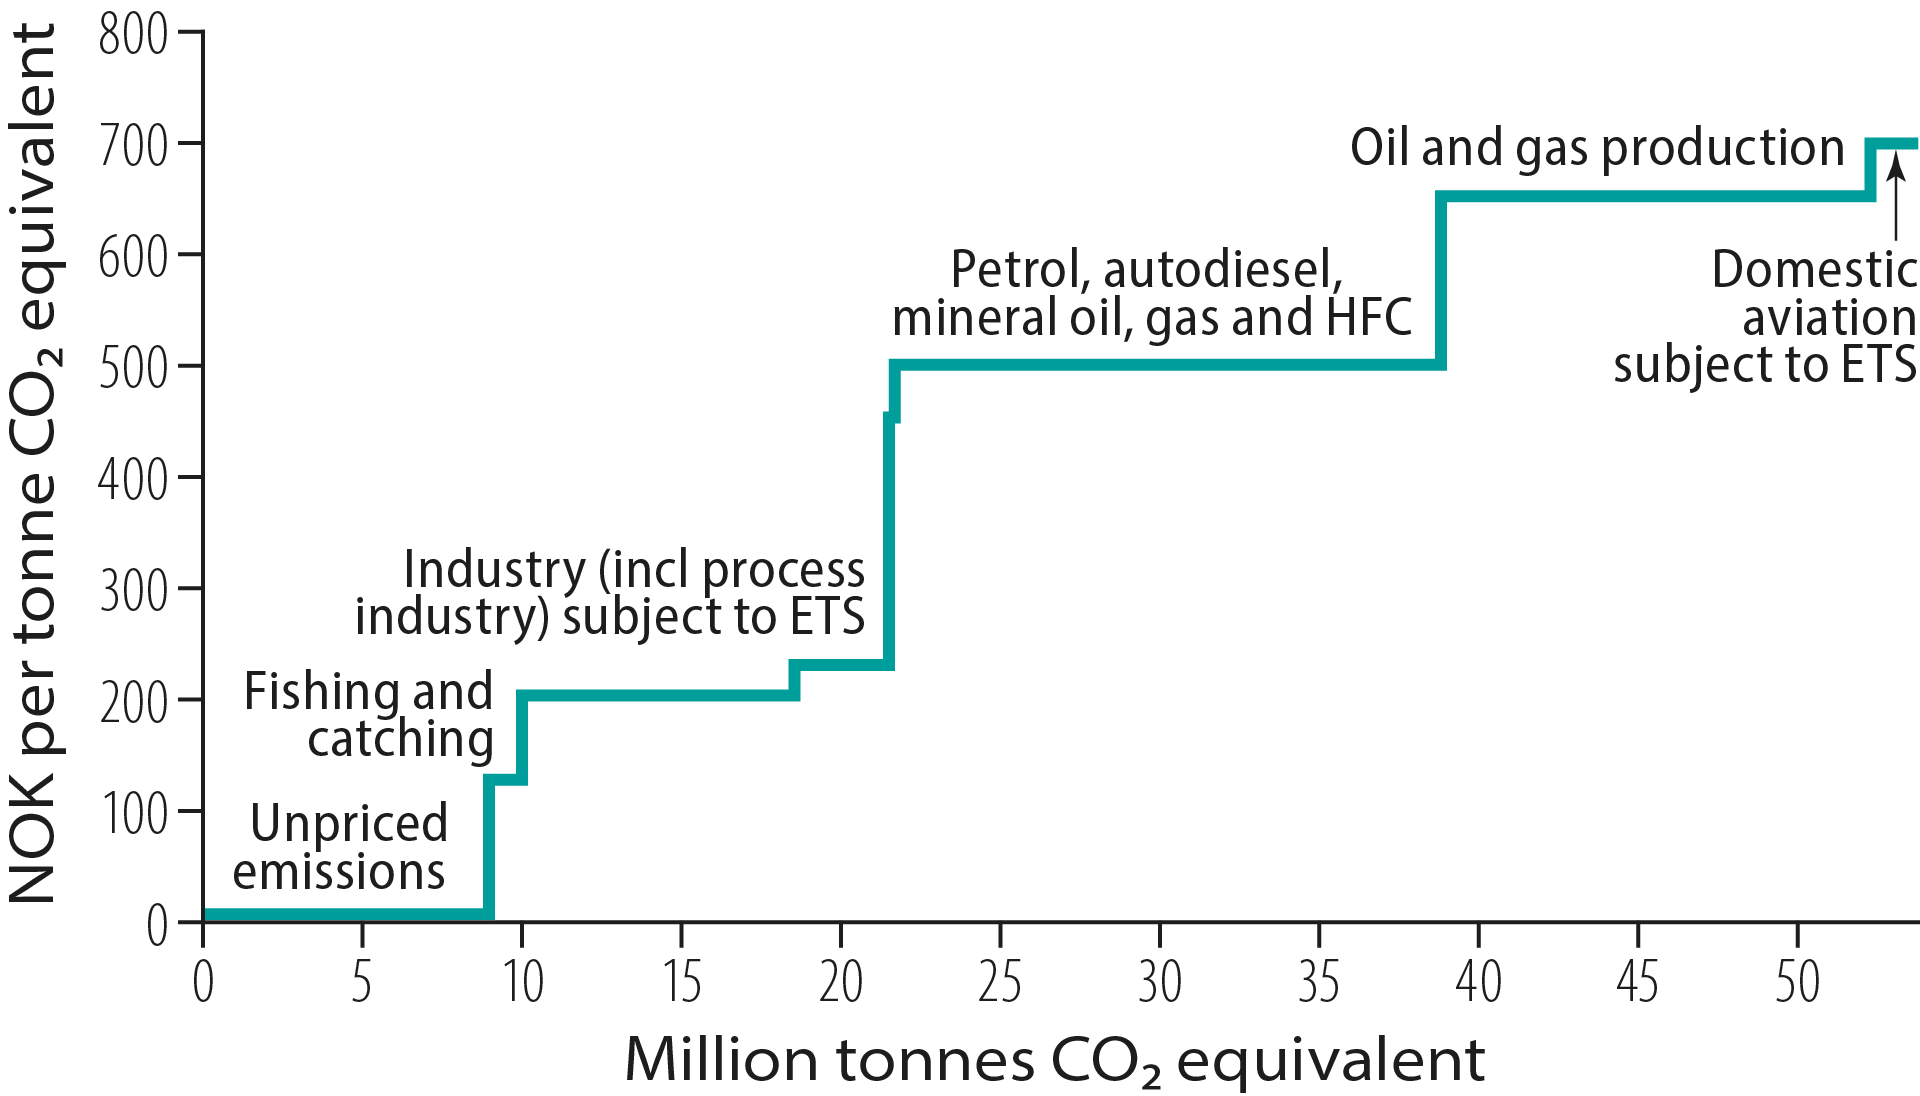 Price (tax/allowances) of GHG emissions in Norway. 